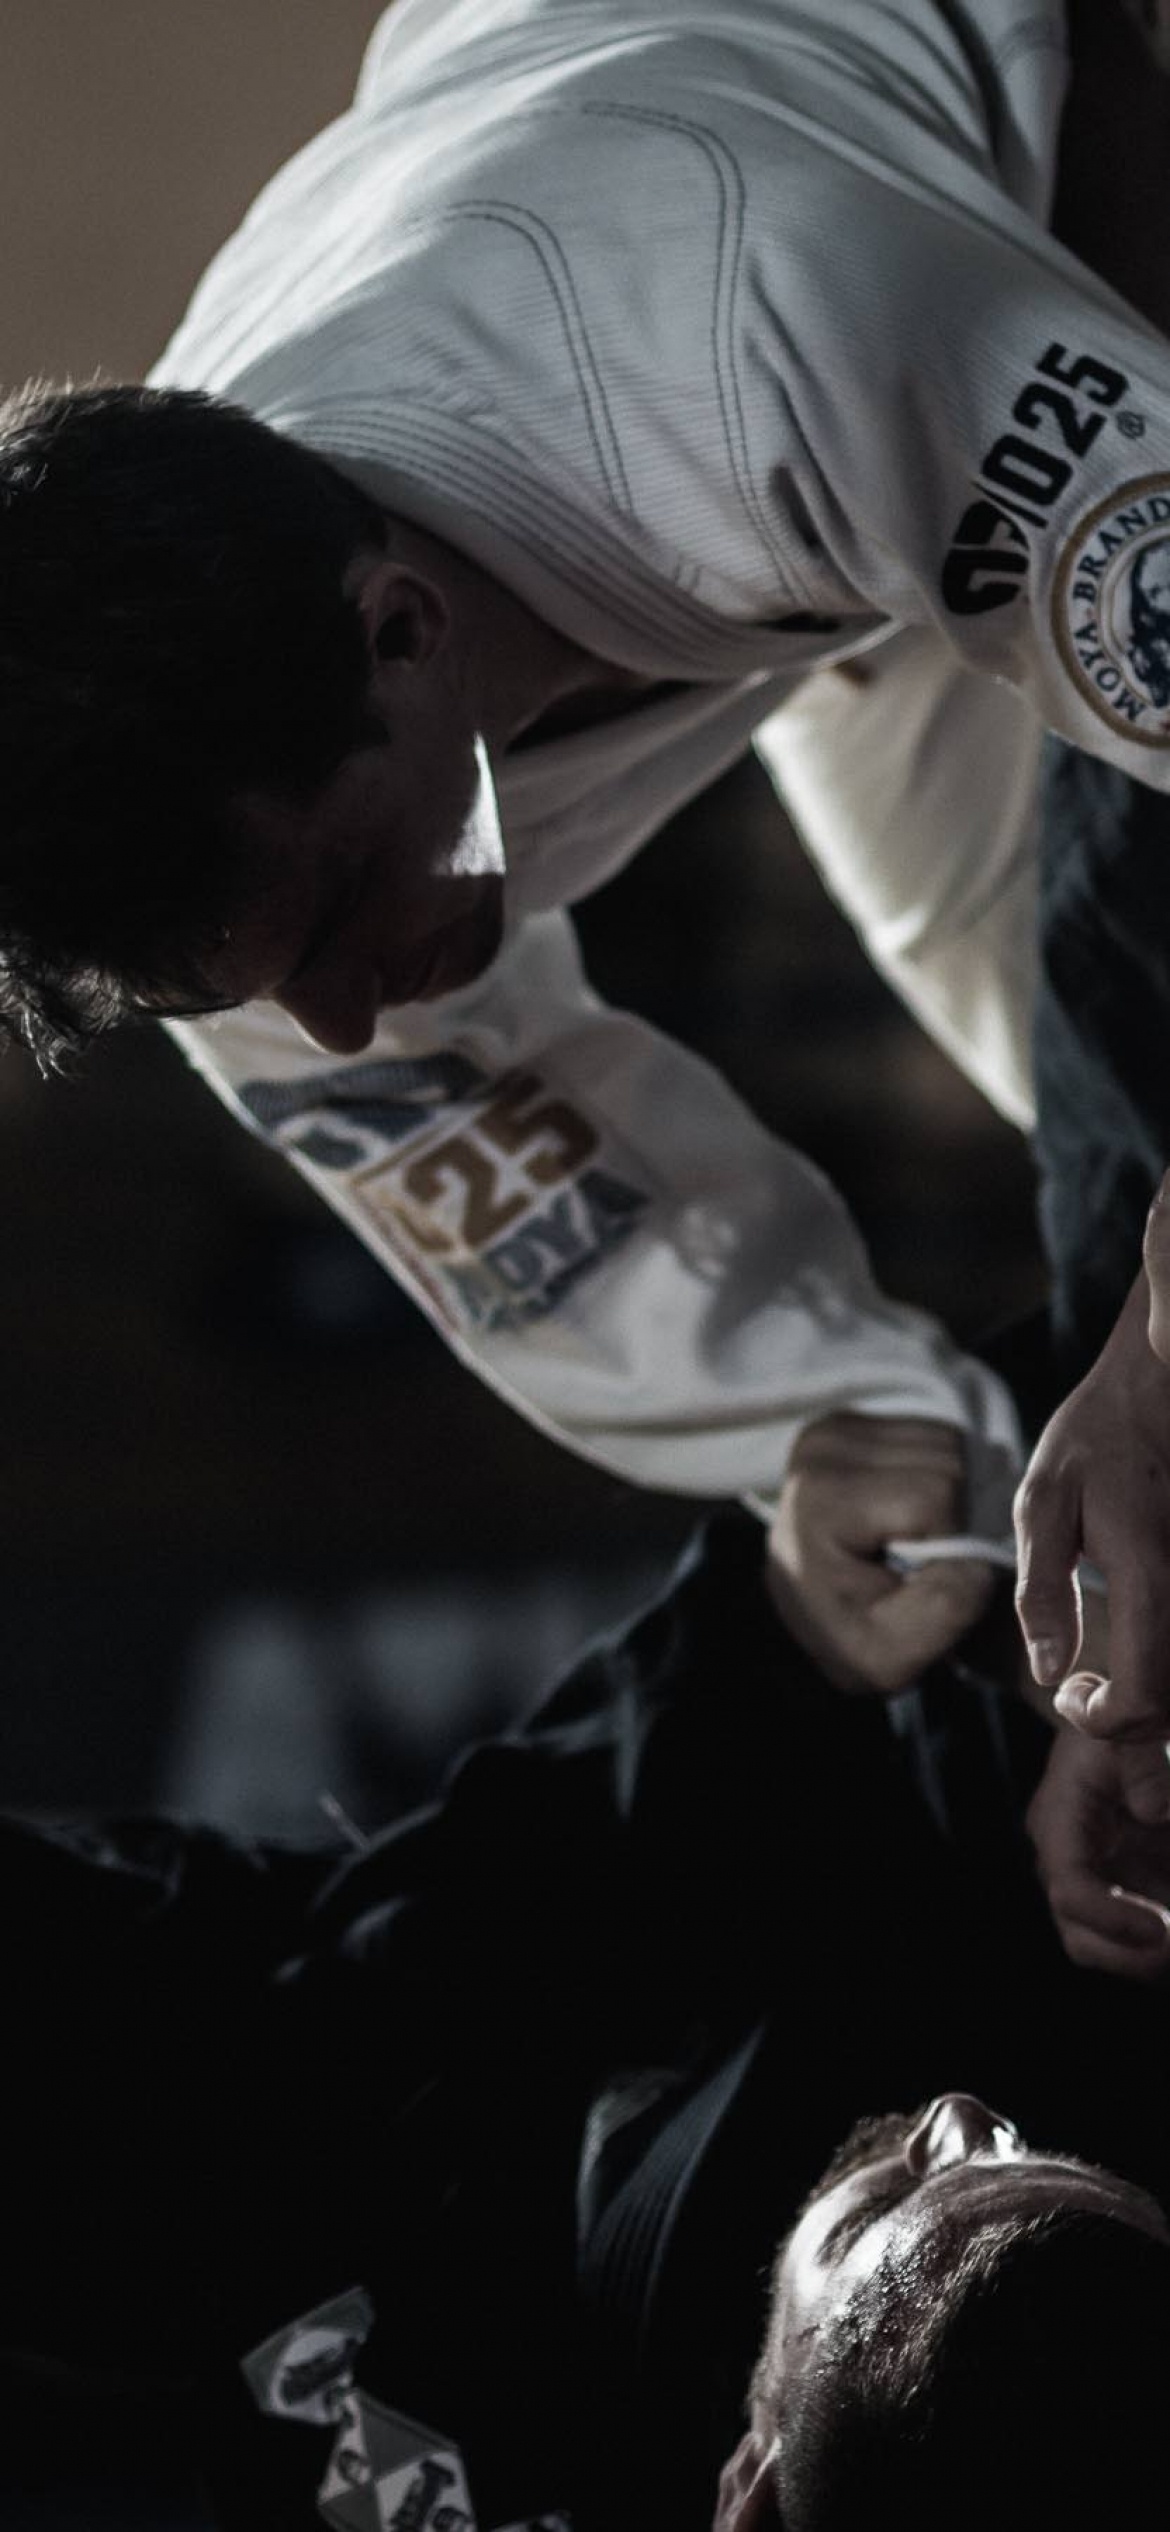 Brazilian Jiu-jitsu: The parts of the training regime: submissions, sparring, and live drilling. 1170x2540 HD Wallpaper.